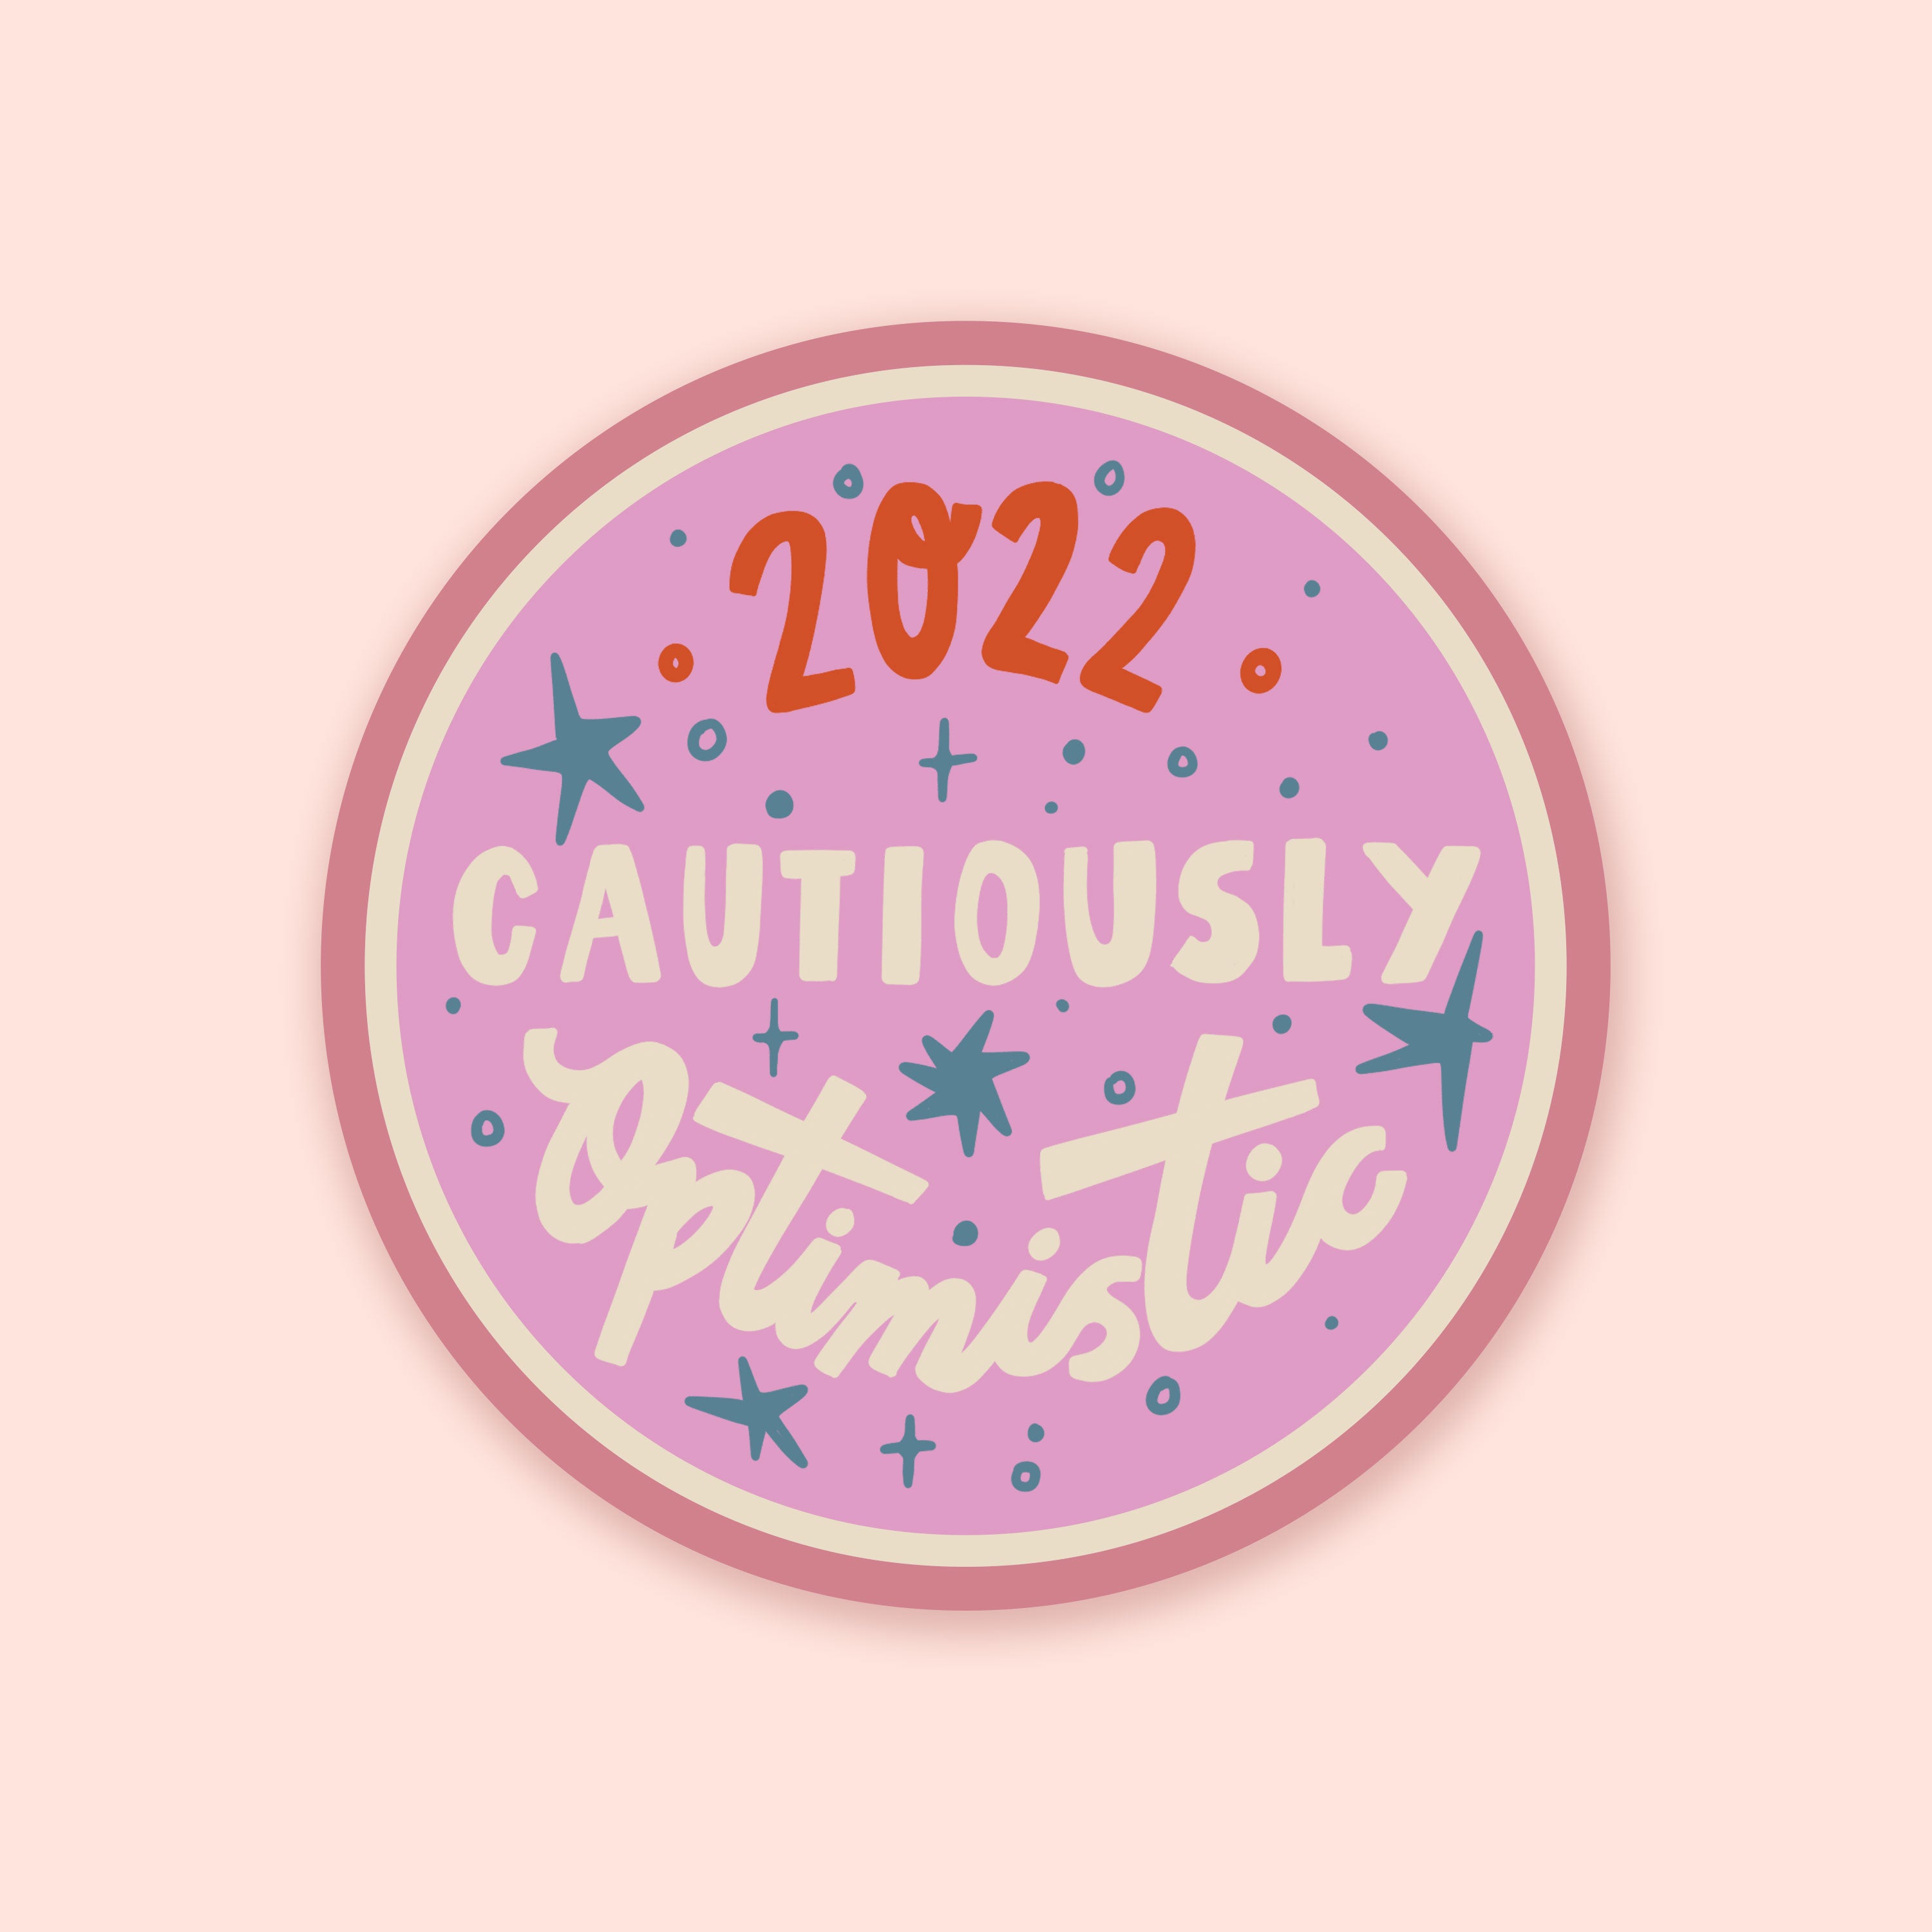 2022 Cautiously Optimistic Patch